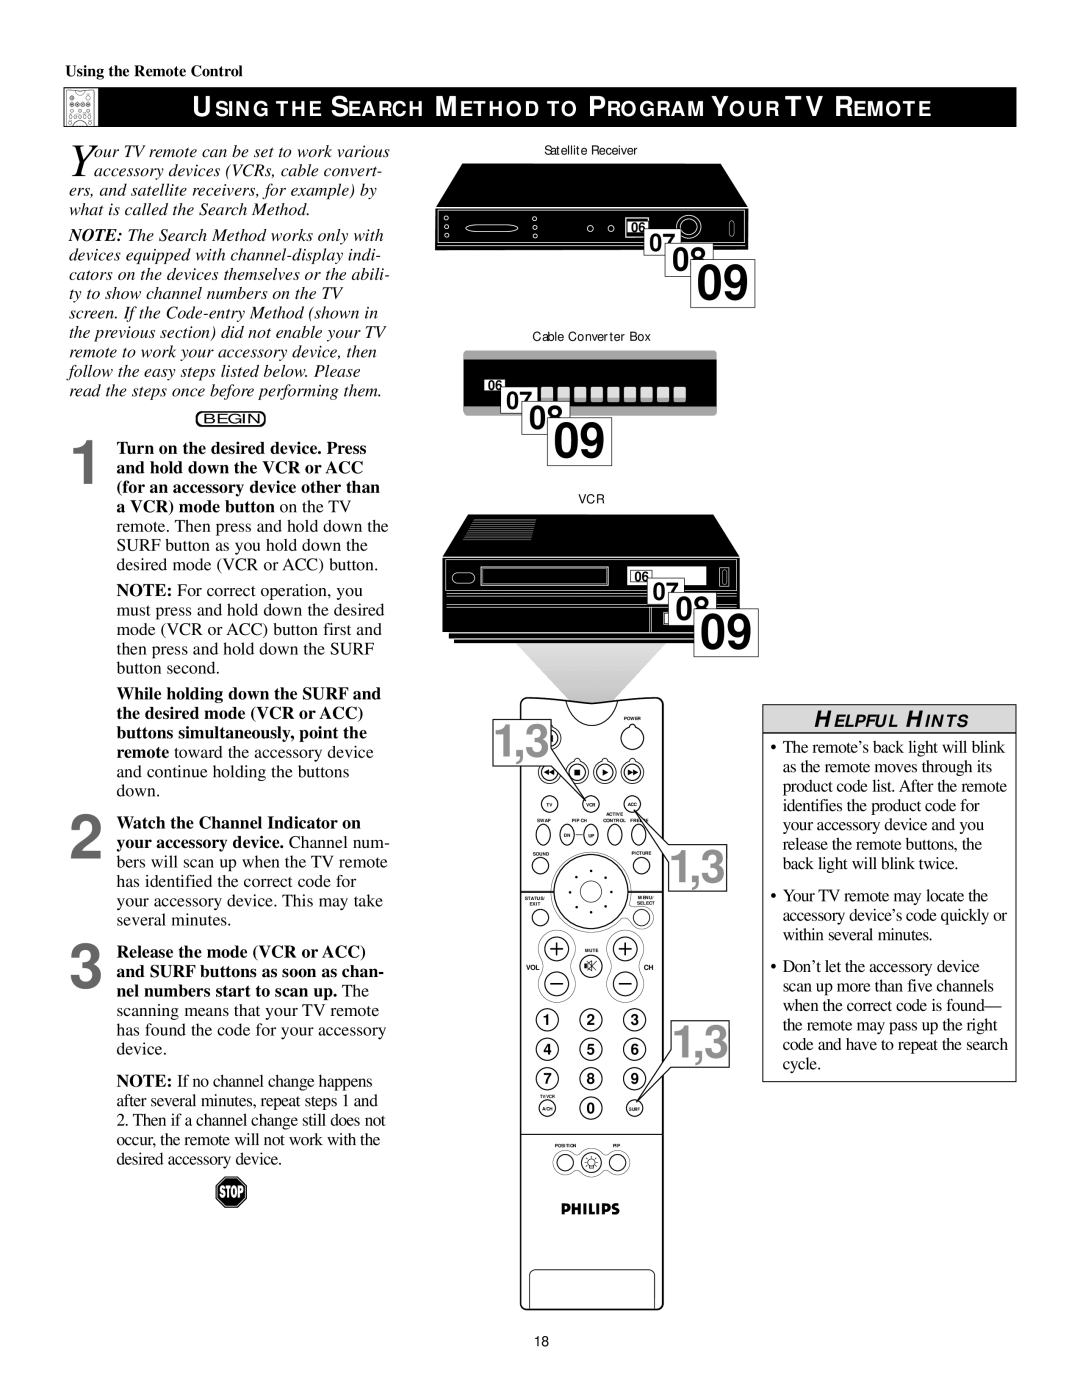 Philips 50PP 9202, 60PP9202, 43PP9202 manual 0809, Using The Search Method To Program Your Tv Remote, Helpful Hints 